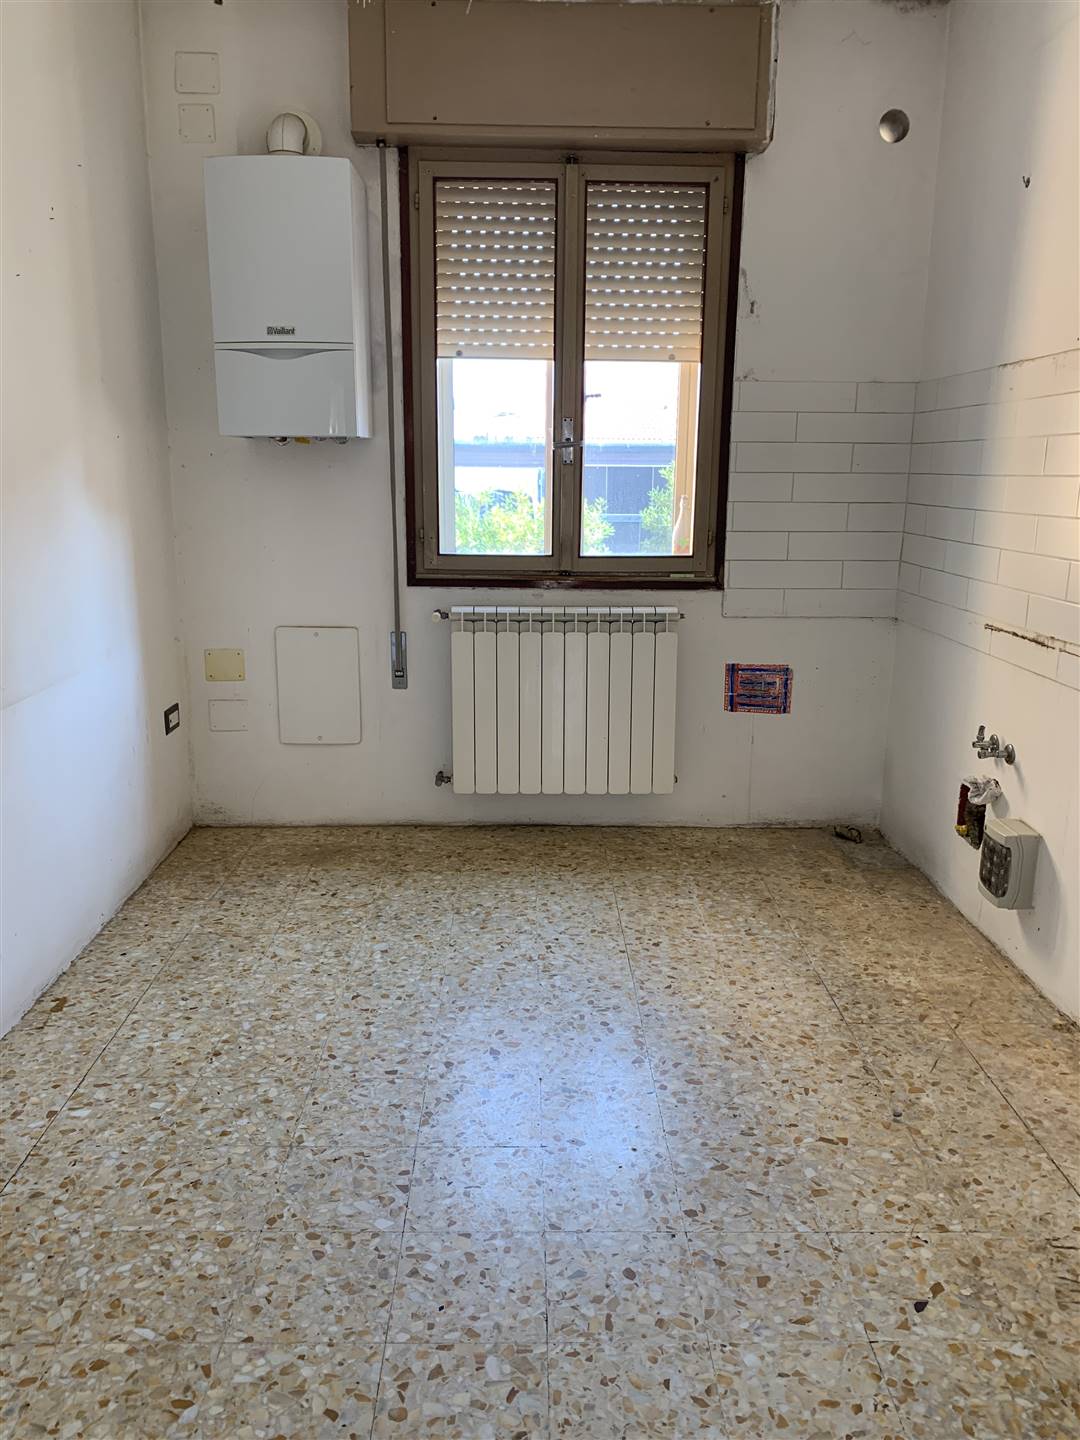 CHIOGGIA CENTRO, CHIOGGIA, Apartment for sale of 90 Sq. mt., Habitable, Heating Individual heating system, Energetic class: G, placed at 1° on 4, 